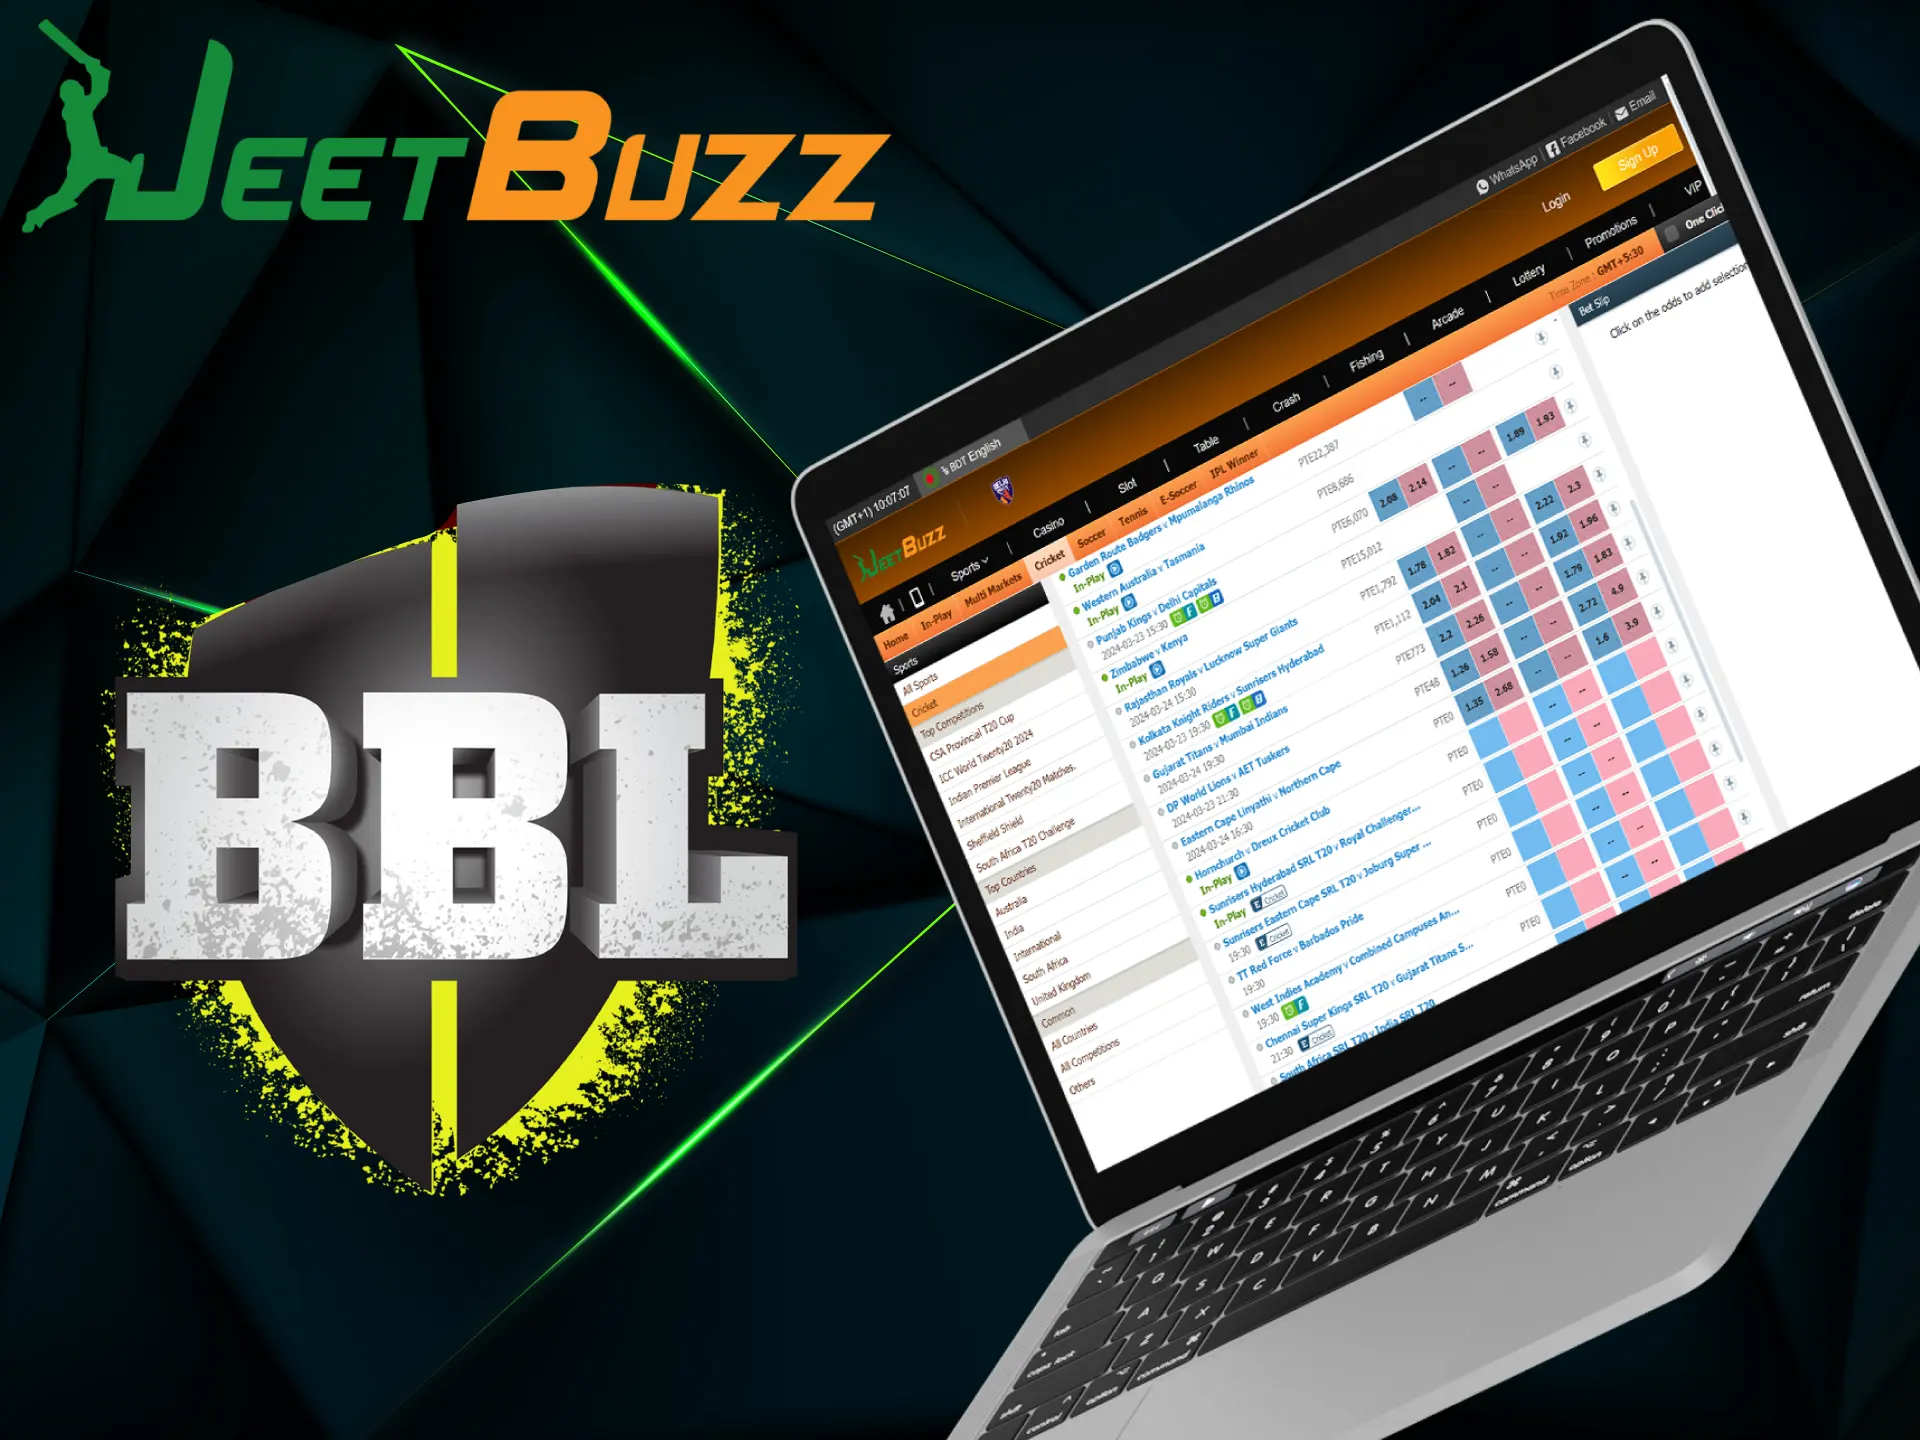 JeetBuzz offers betting on the Twenty20 cricket competition.